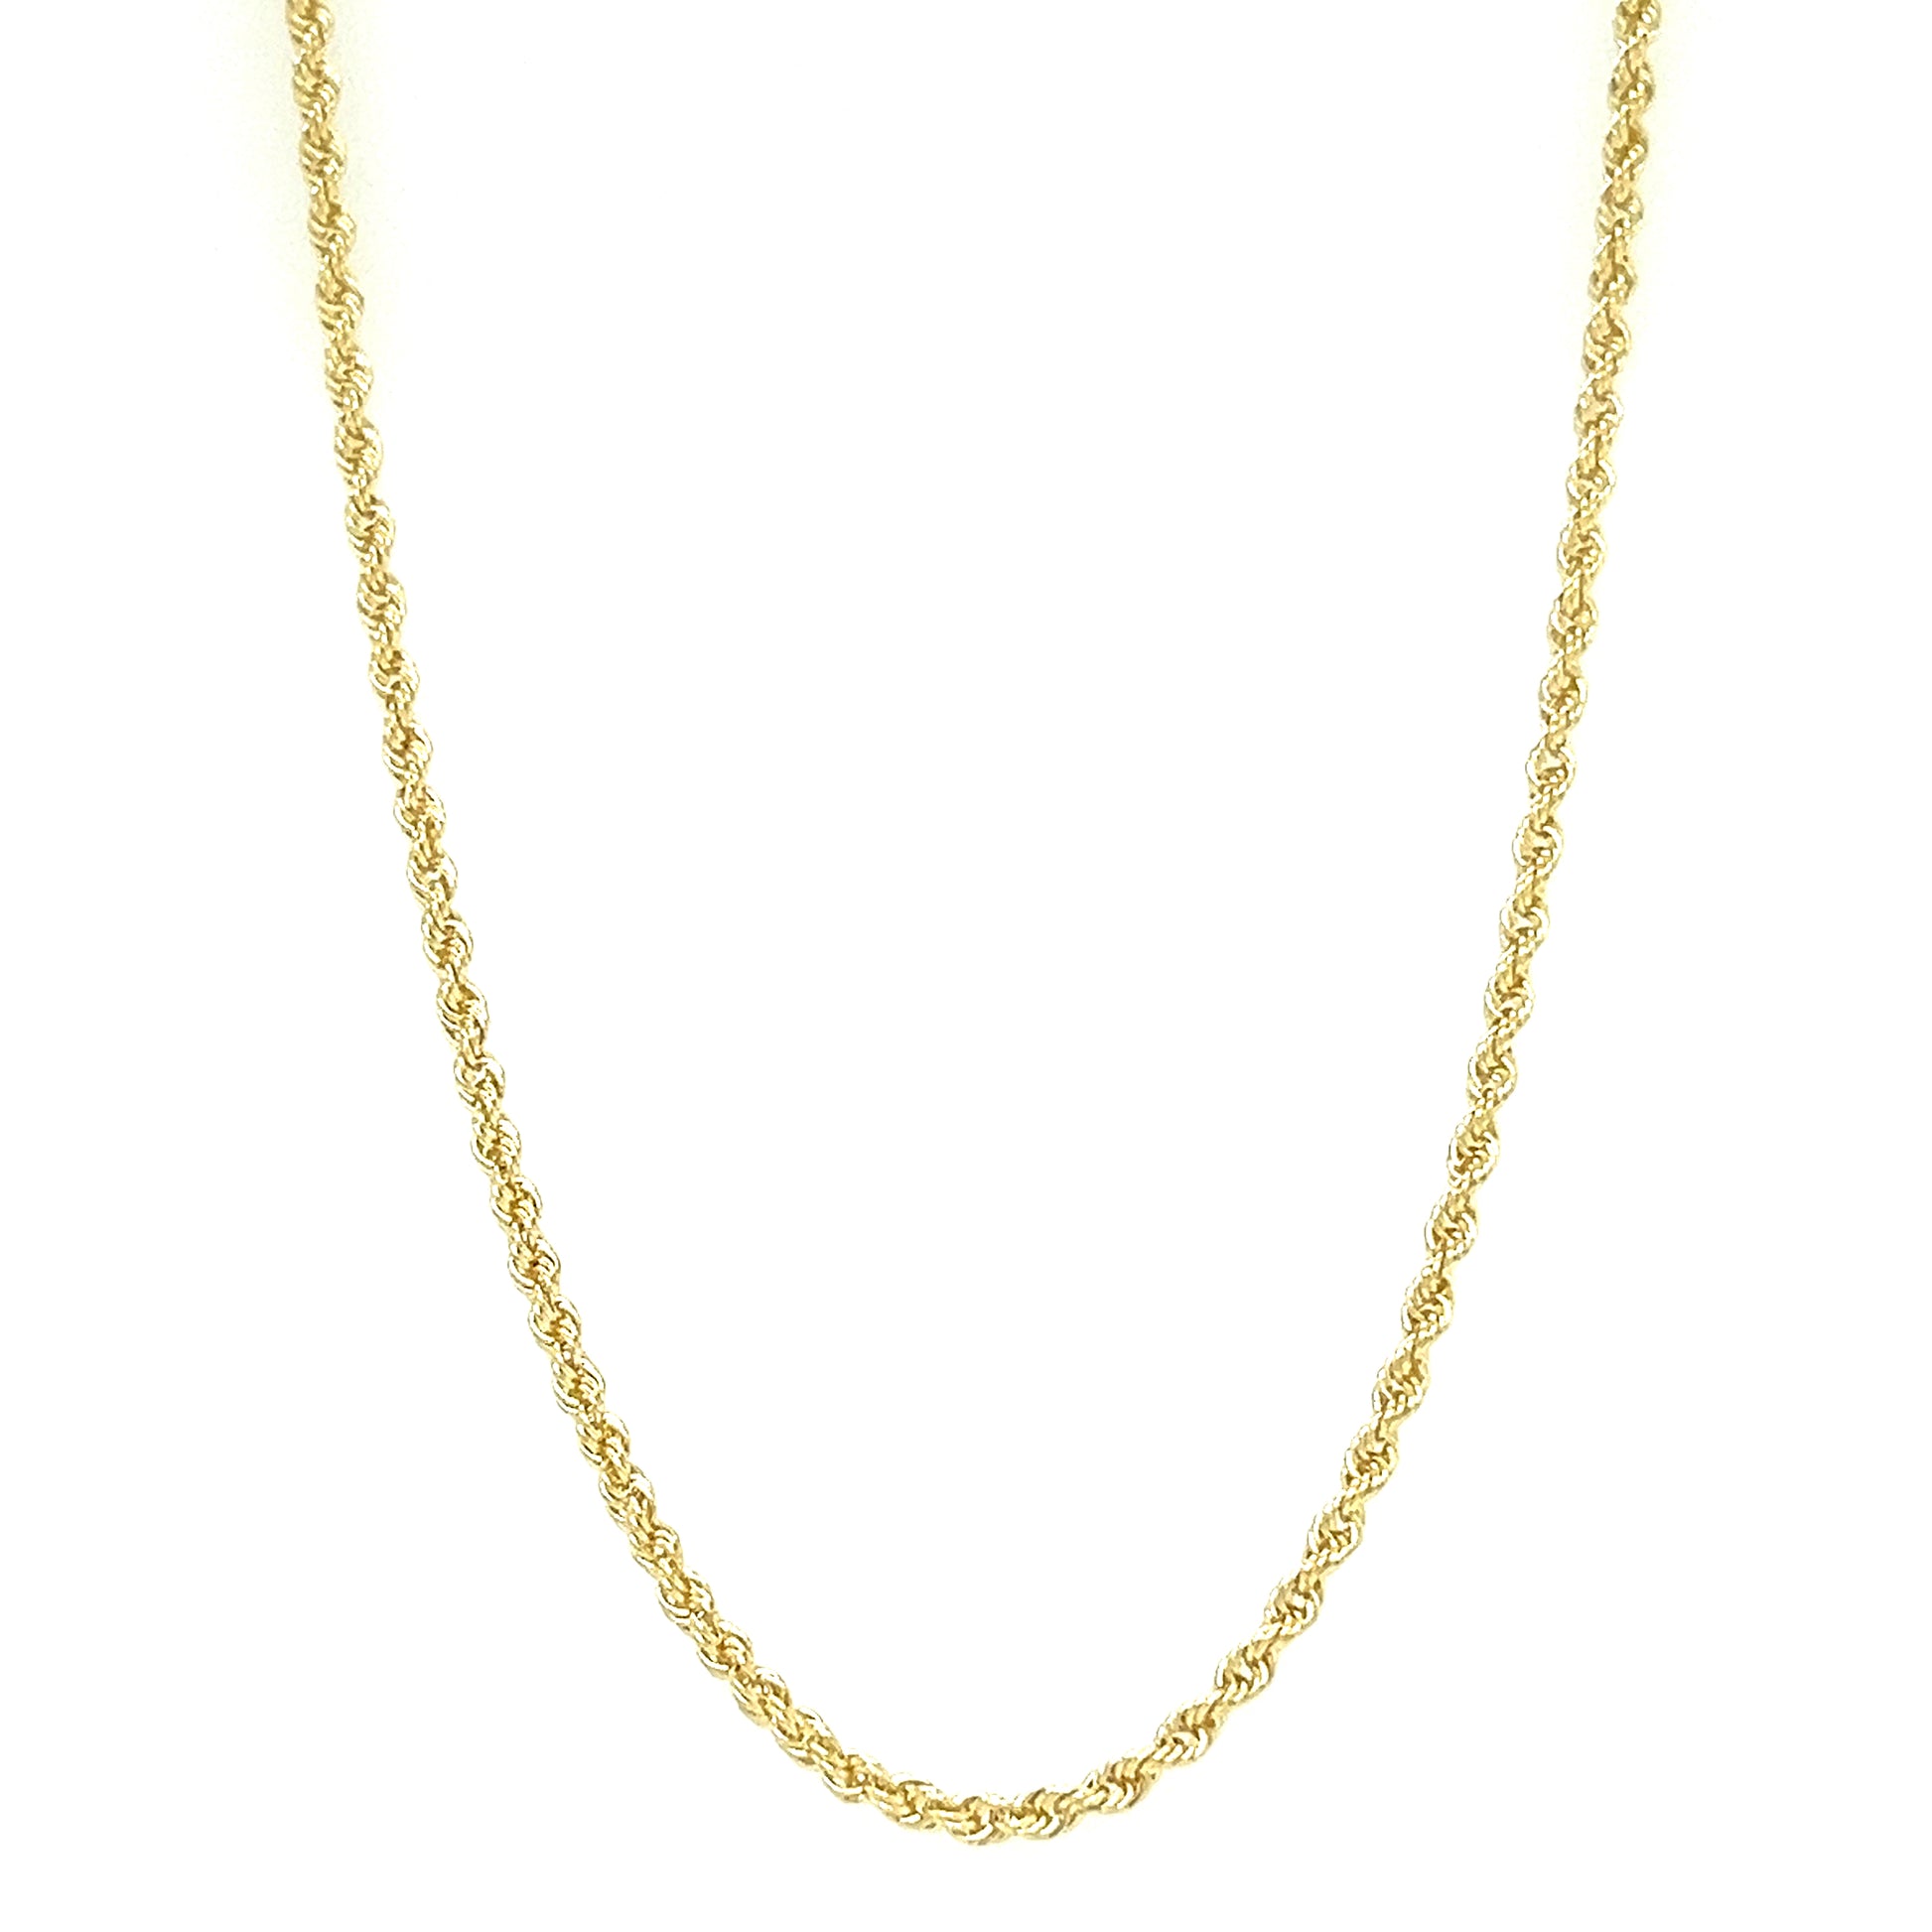 Rope Chain 2mm in 14K Yellow Gold Front View